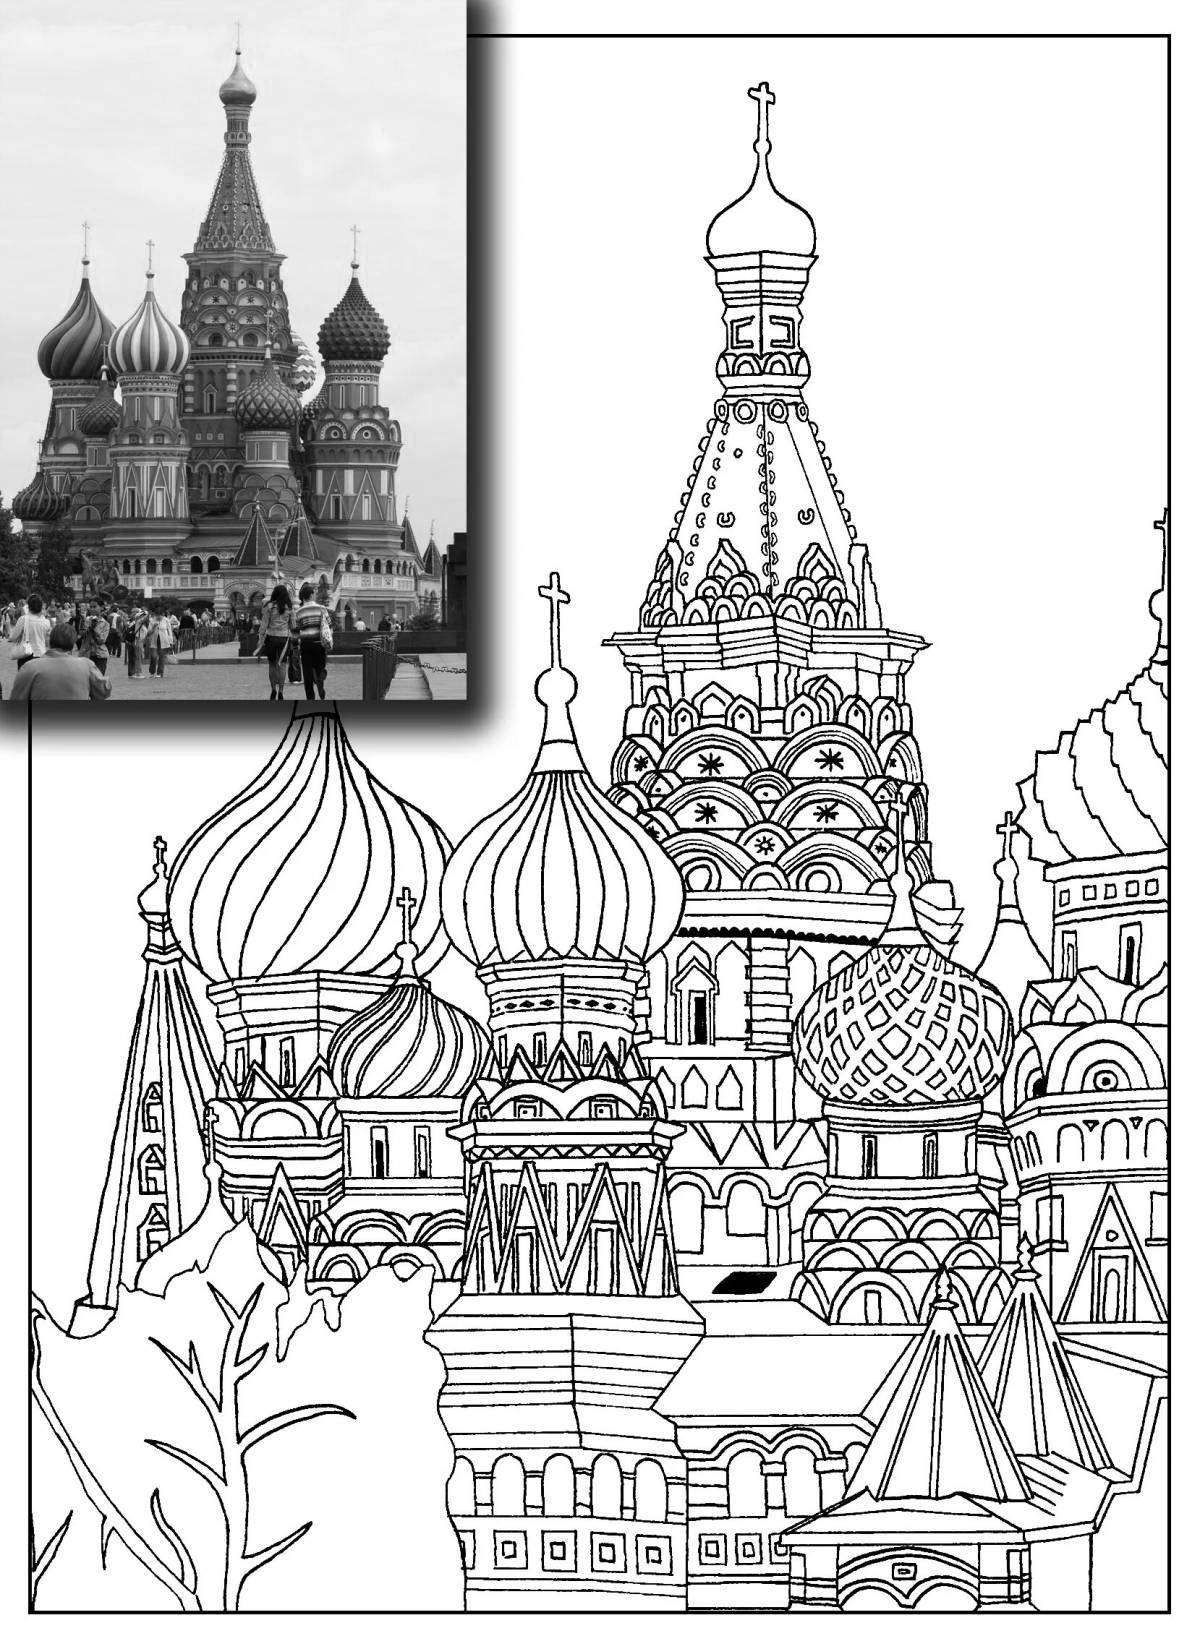 Attractive kremlin moscow coloring book for kids